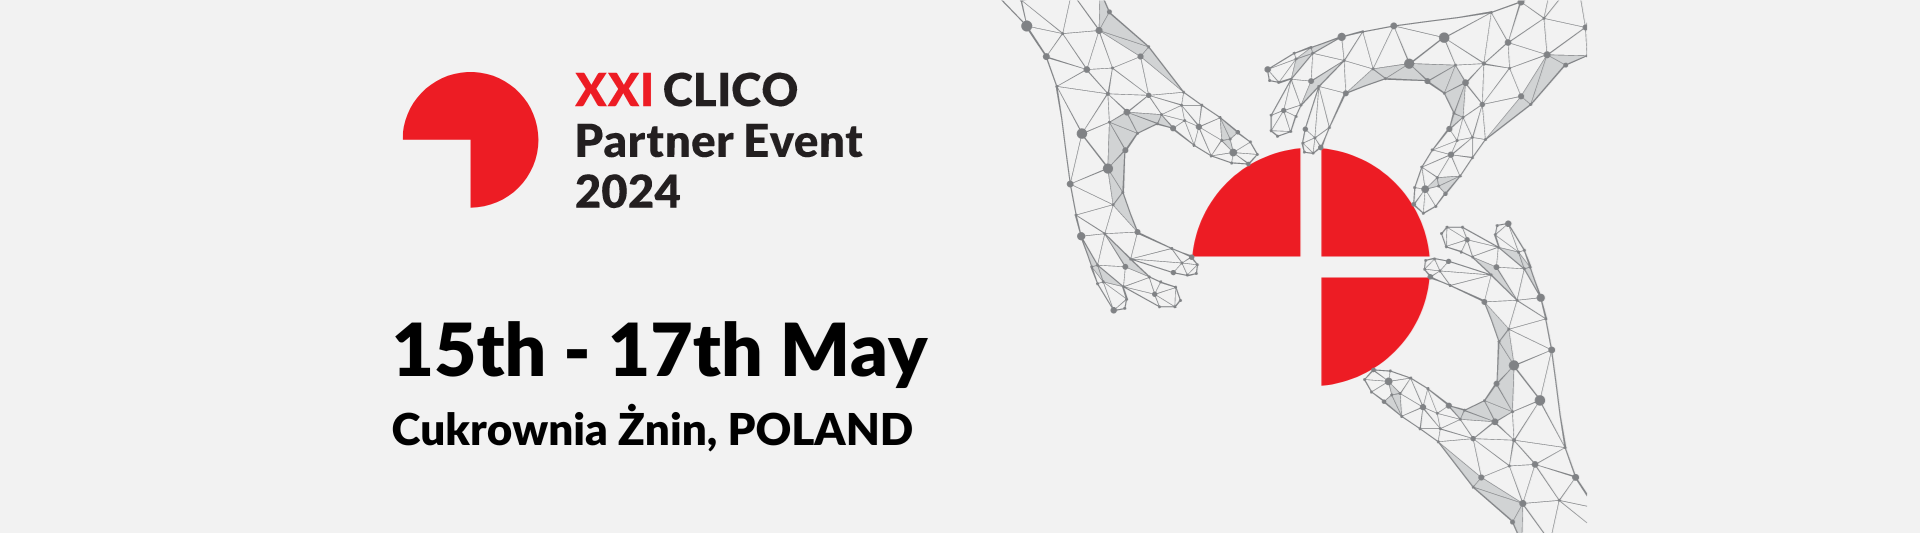 CLICO Partner Event 2024 | May 15-17